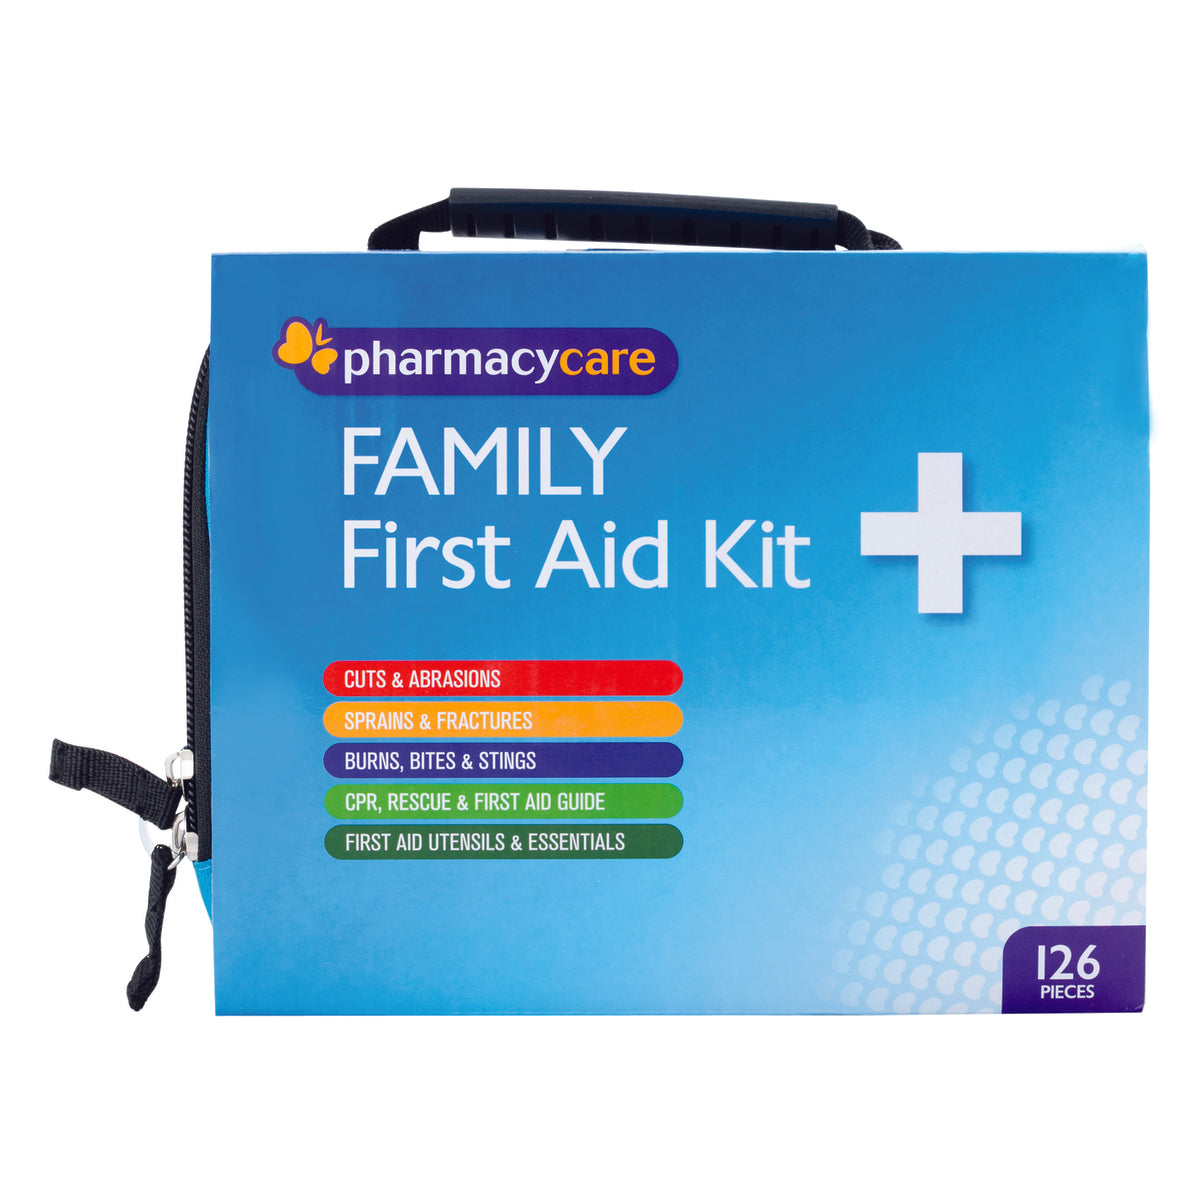 Pharmacy Care First Aid Kit Family - 126 Pieces